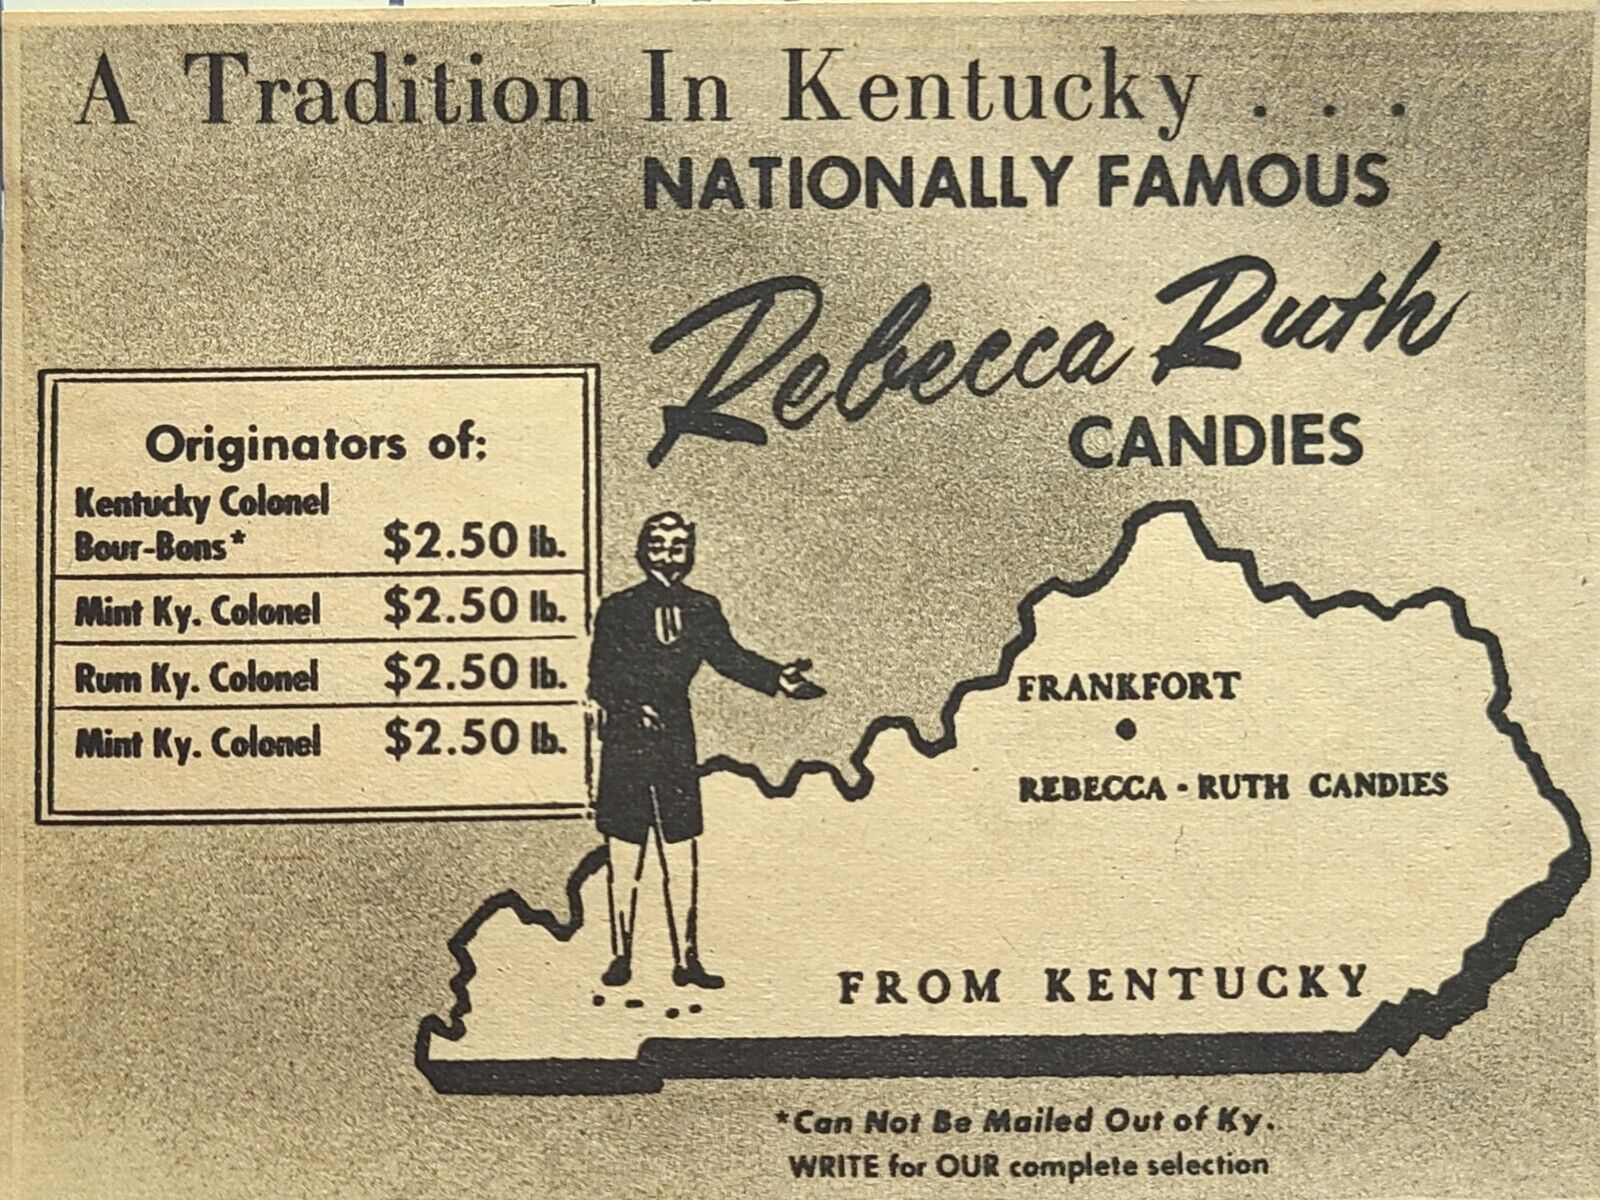 Rebecca-Ruth Candies Frankfort KY Nationally Famous Vintage Print Ad 1960